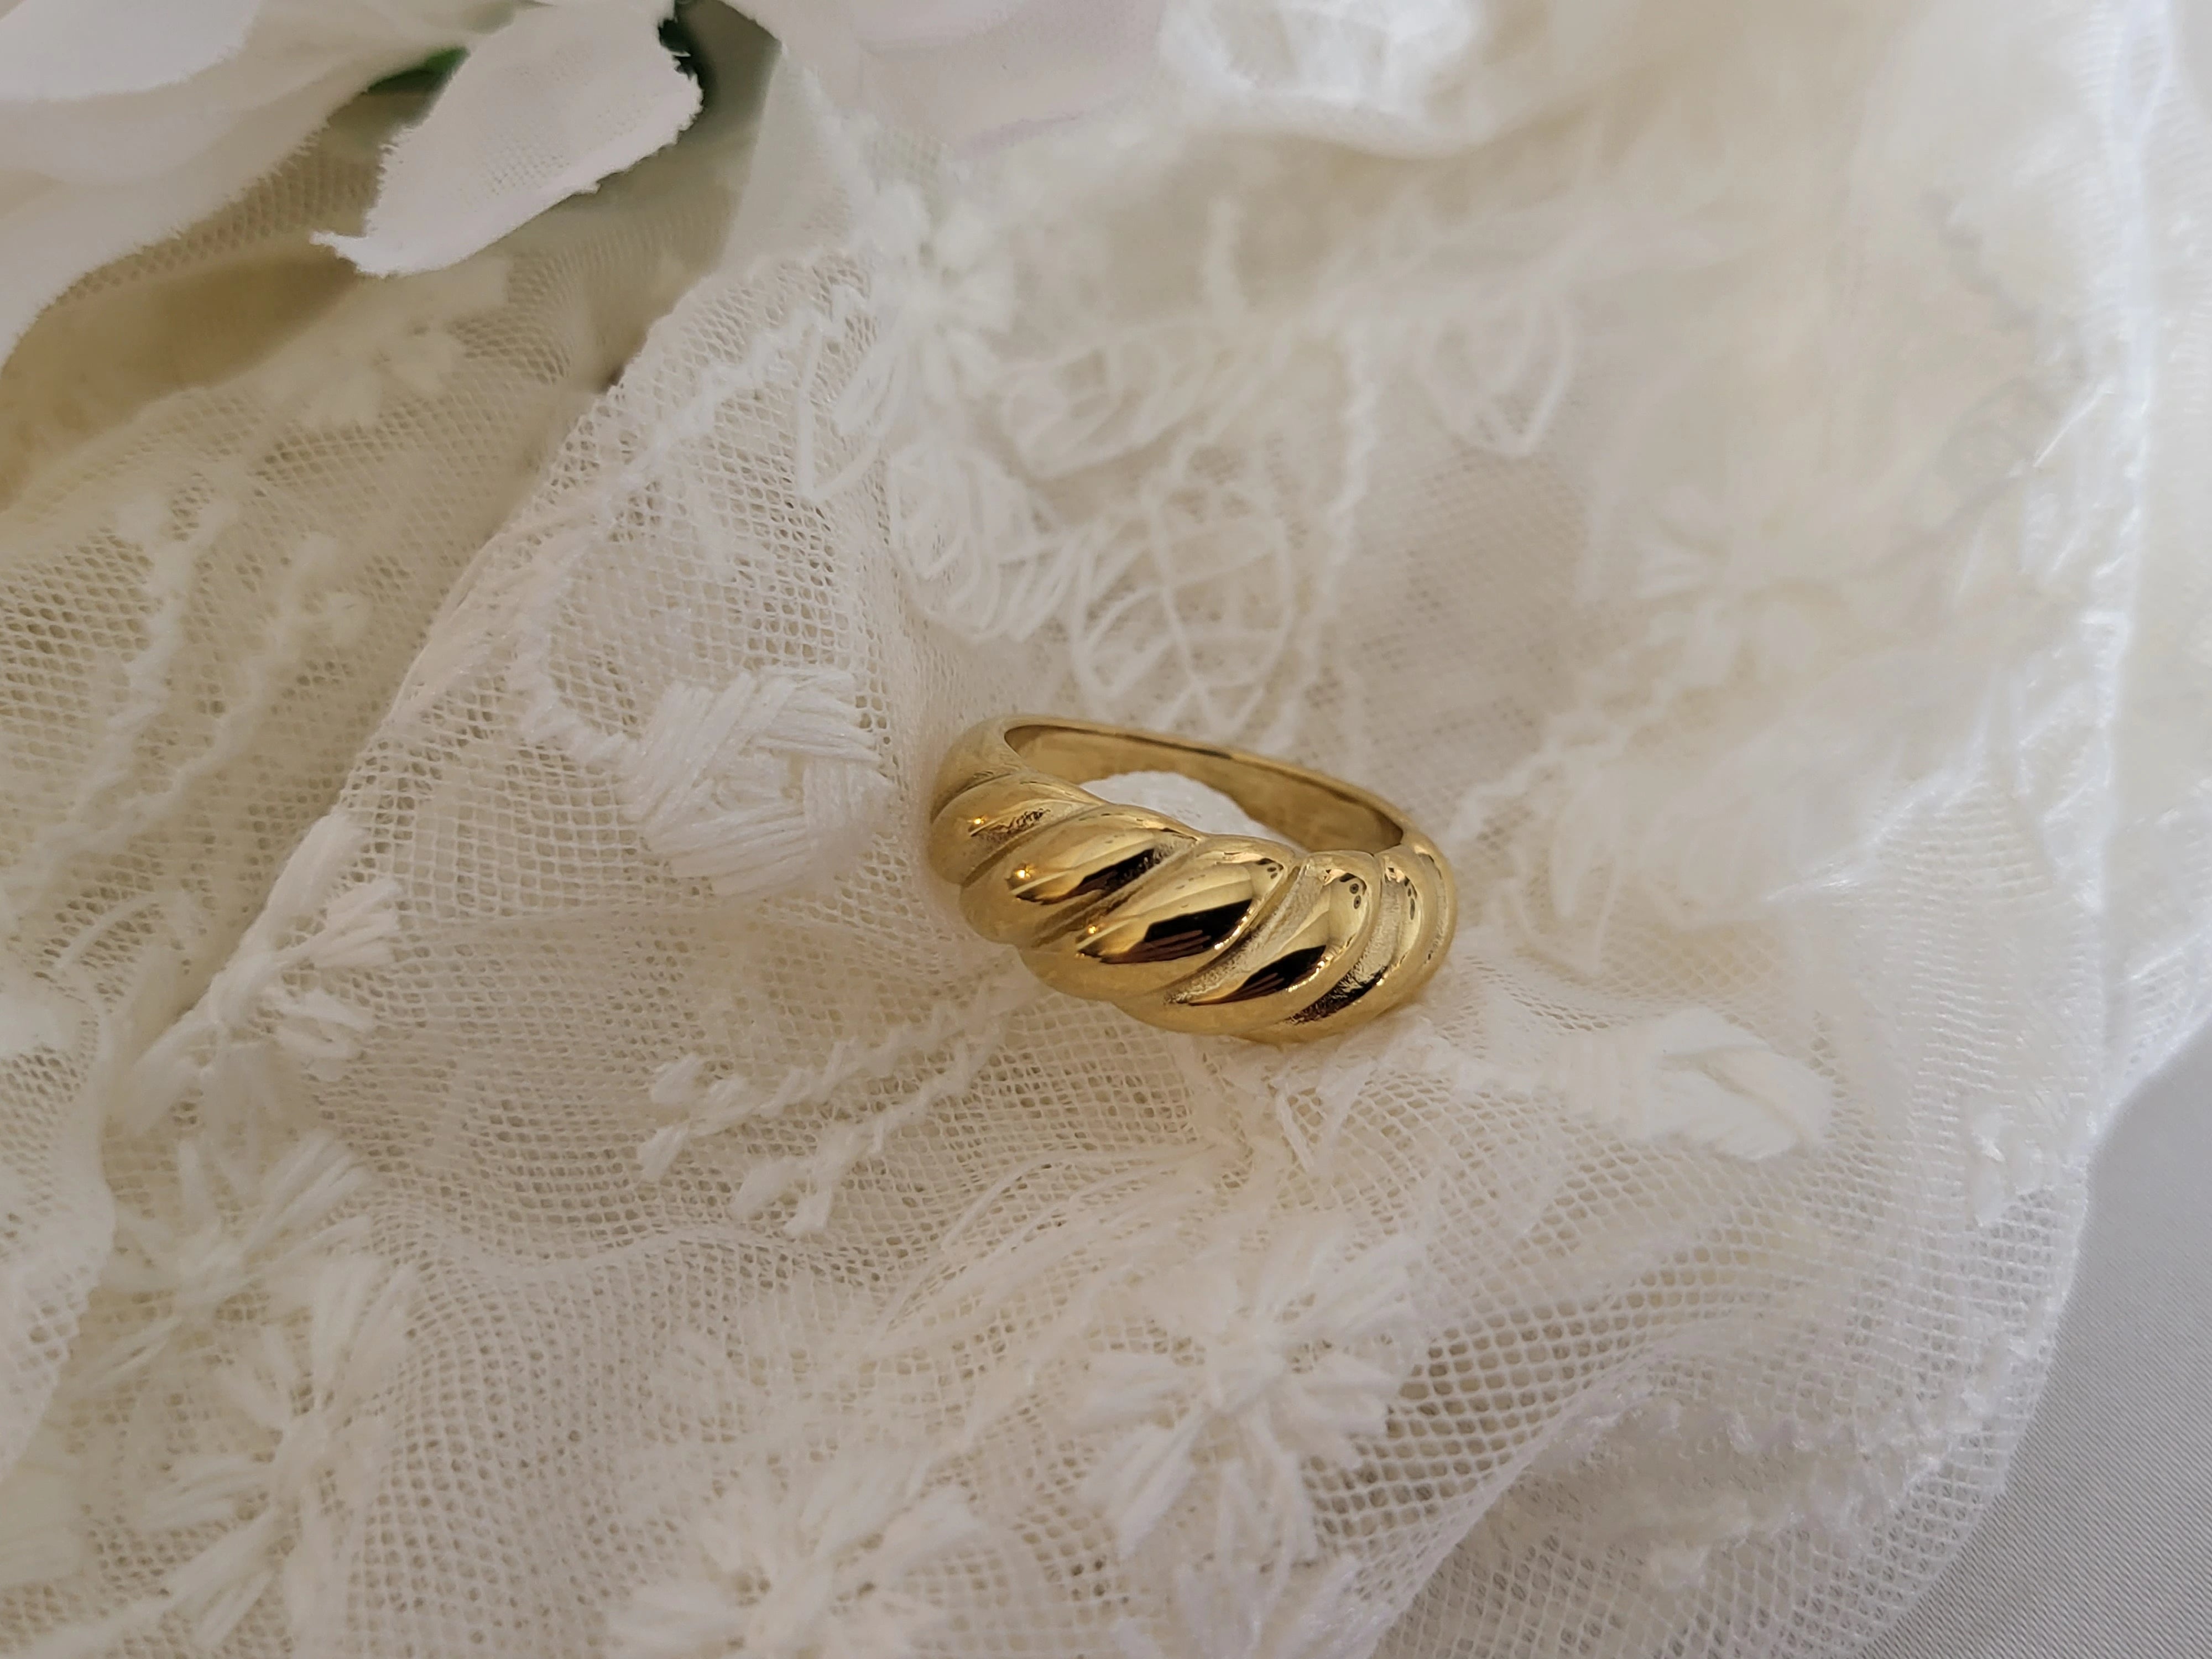 Gold Filled Croissant Ring